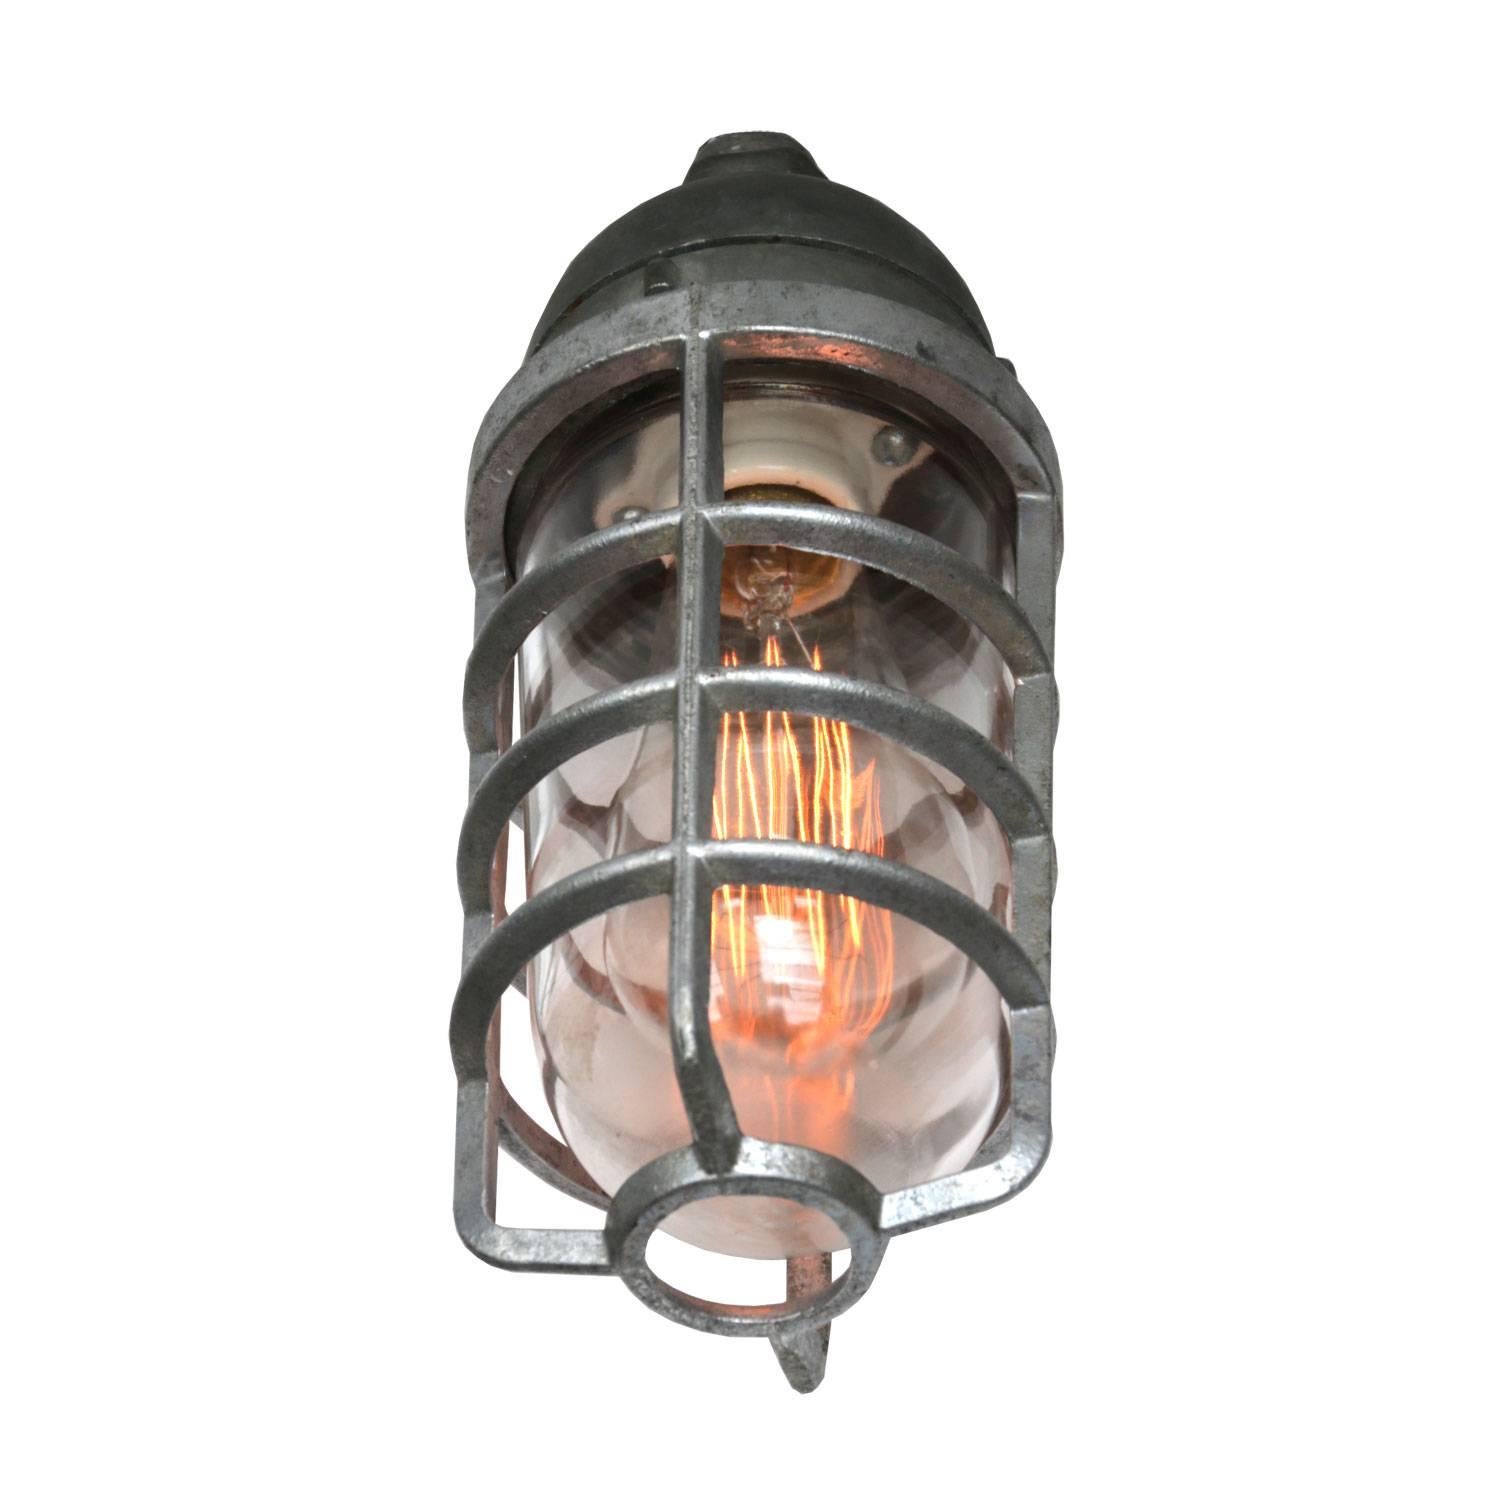 Vintage American industrial cage light. Cast aluminium. Clear glass.

Weight: 1.0 kg / 2.2 lb

All lamps have been made suitable by international standards for incandescent light bulbs, energy-efficient and LED bulbs. E26/E27 bulb holders and new